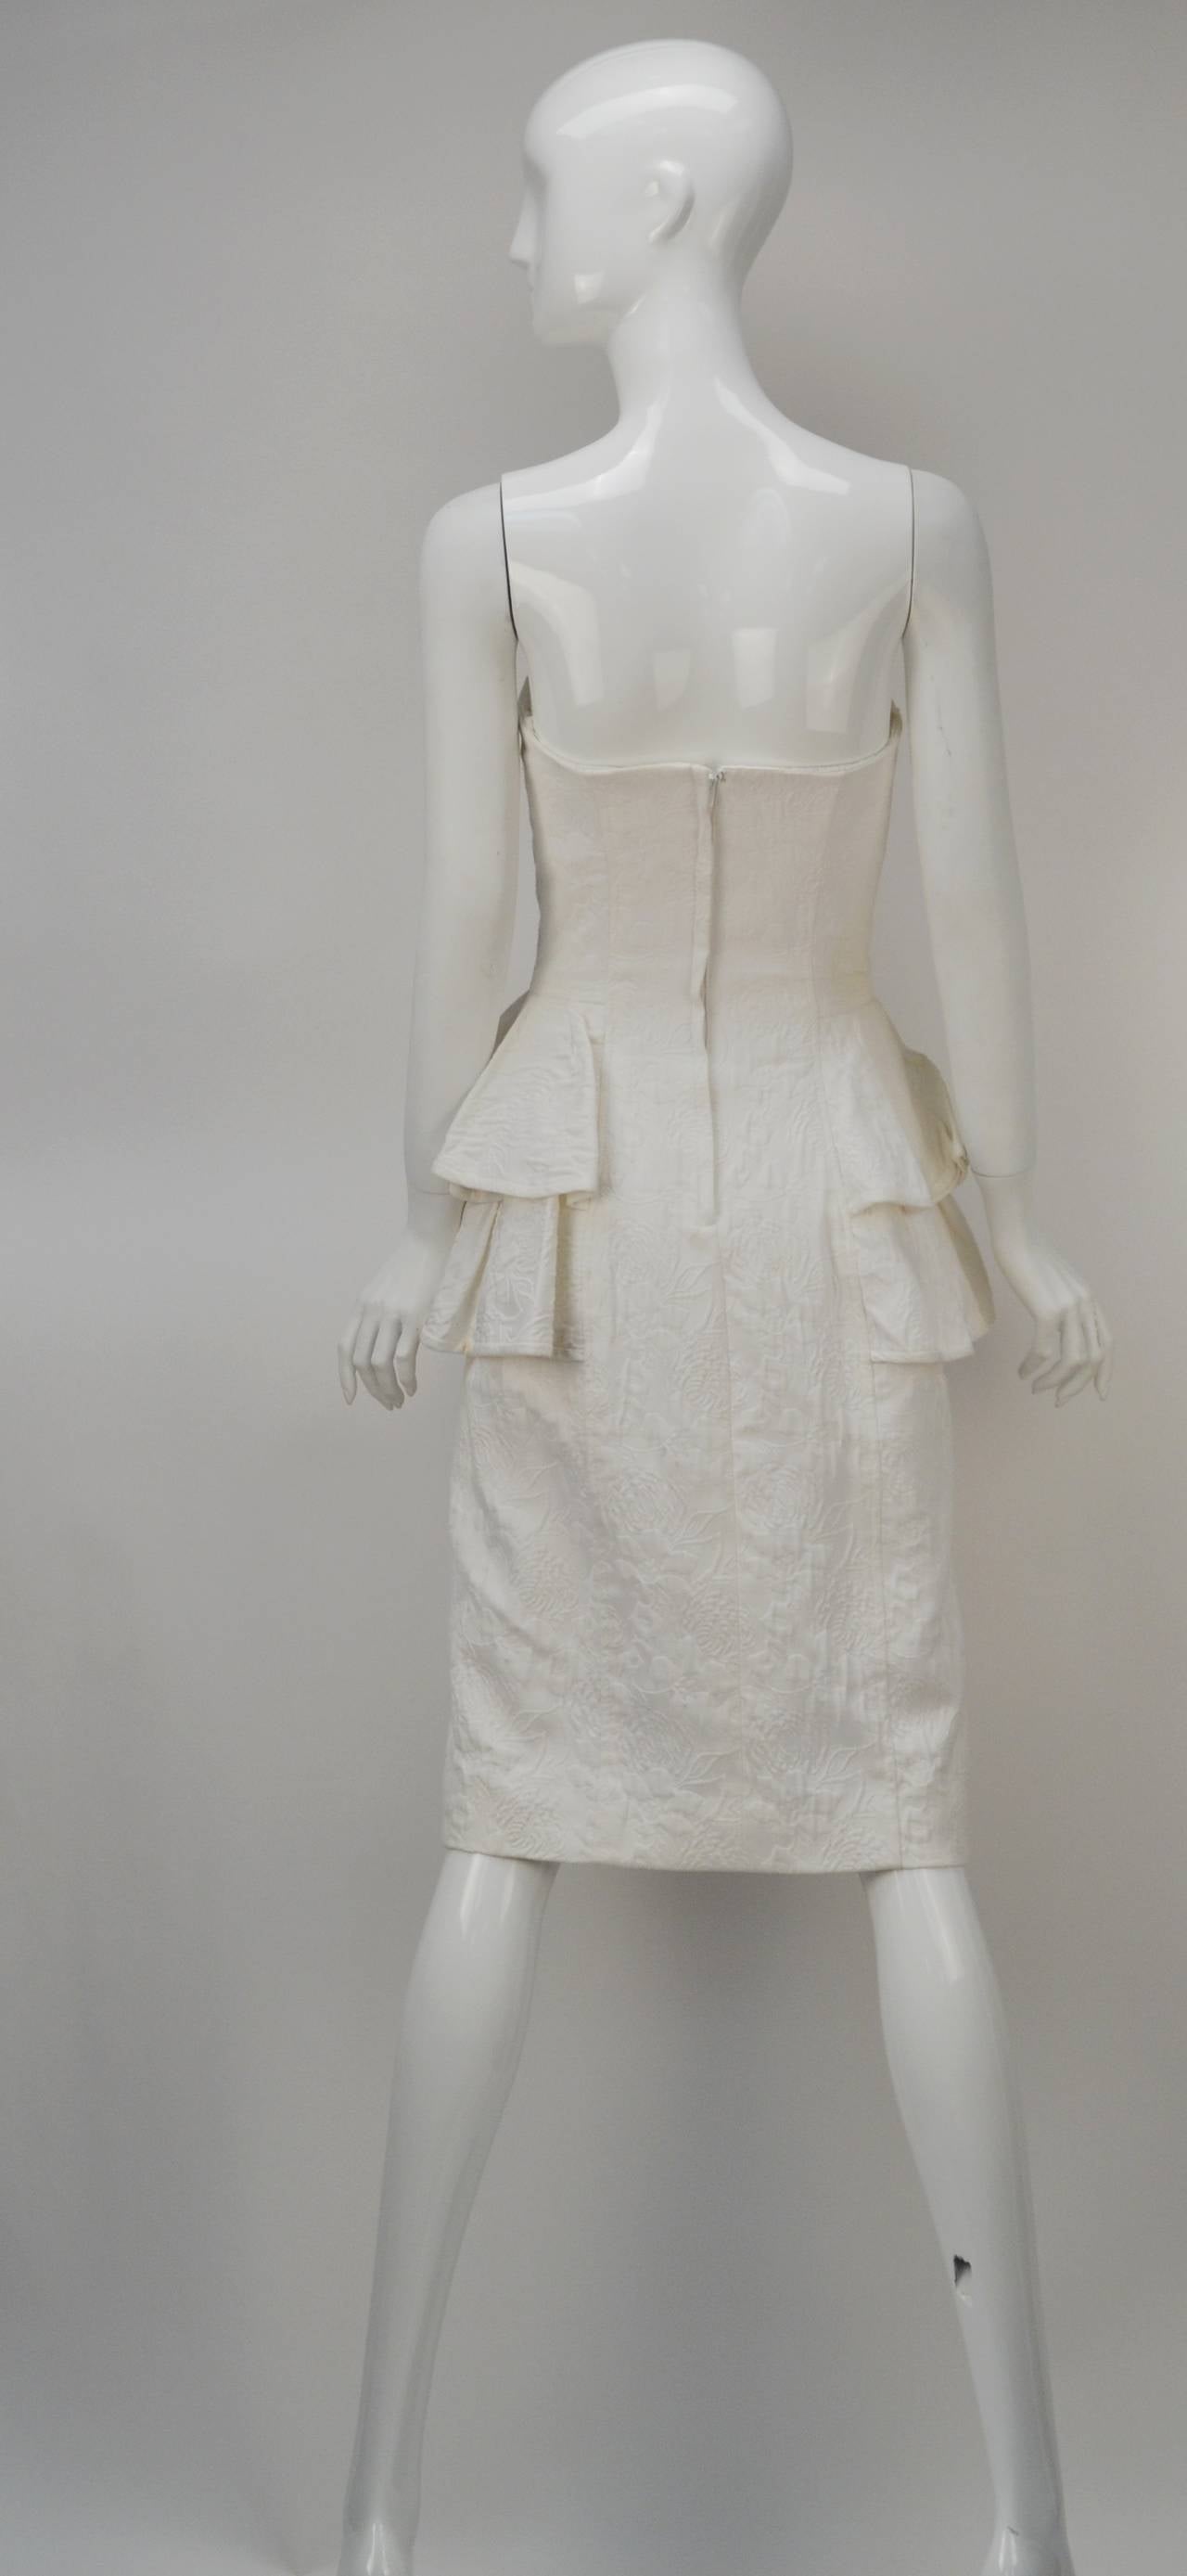 We all need a strapless white dress this summer.  Victor Costa created this elegant yet simple white matelassé dress with side peplums. Decorative buttons on the front. Zips up the back. It has a fitted bodice which extenuates your waist and all